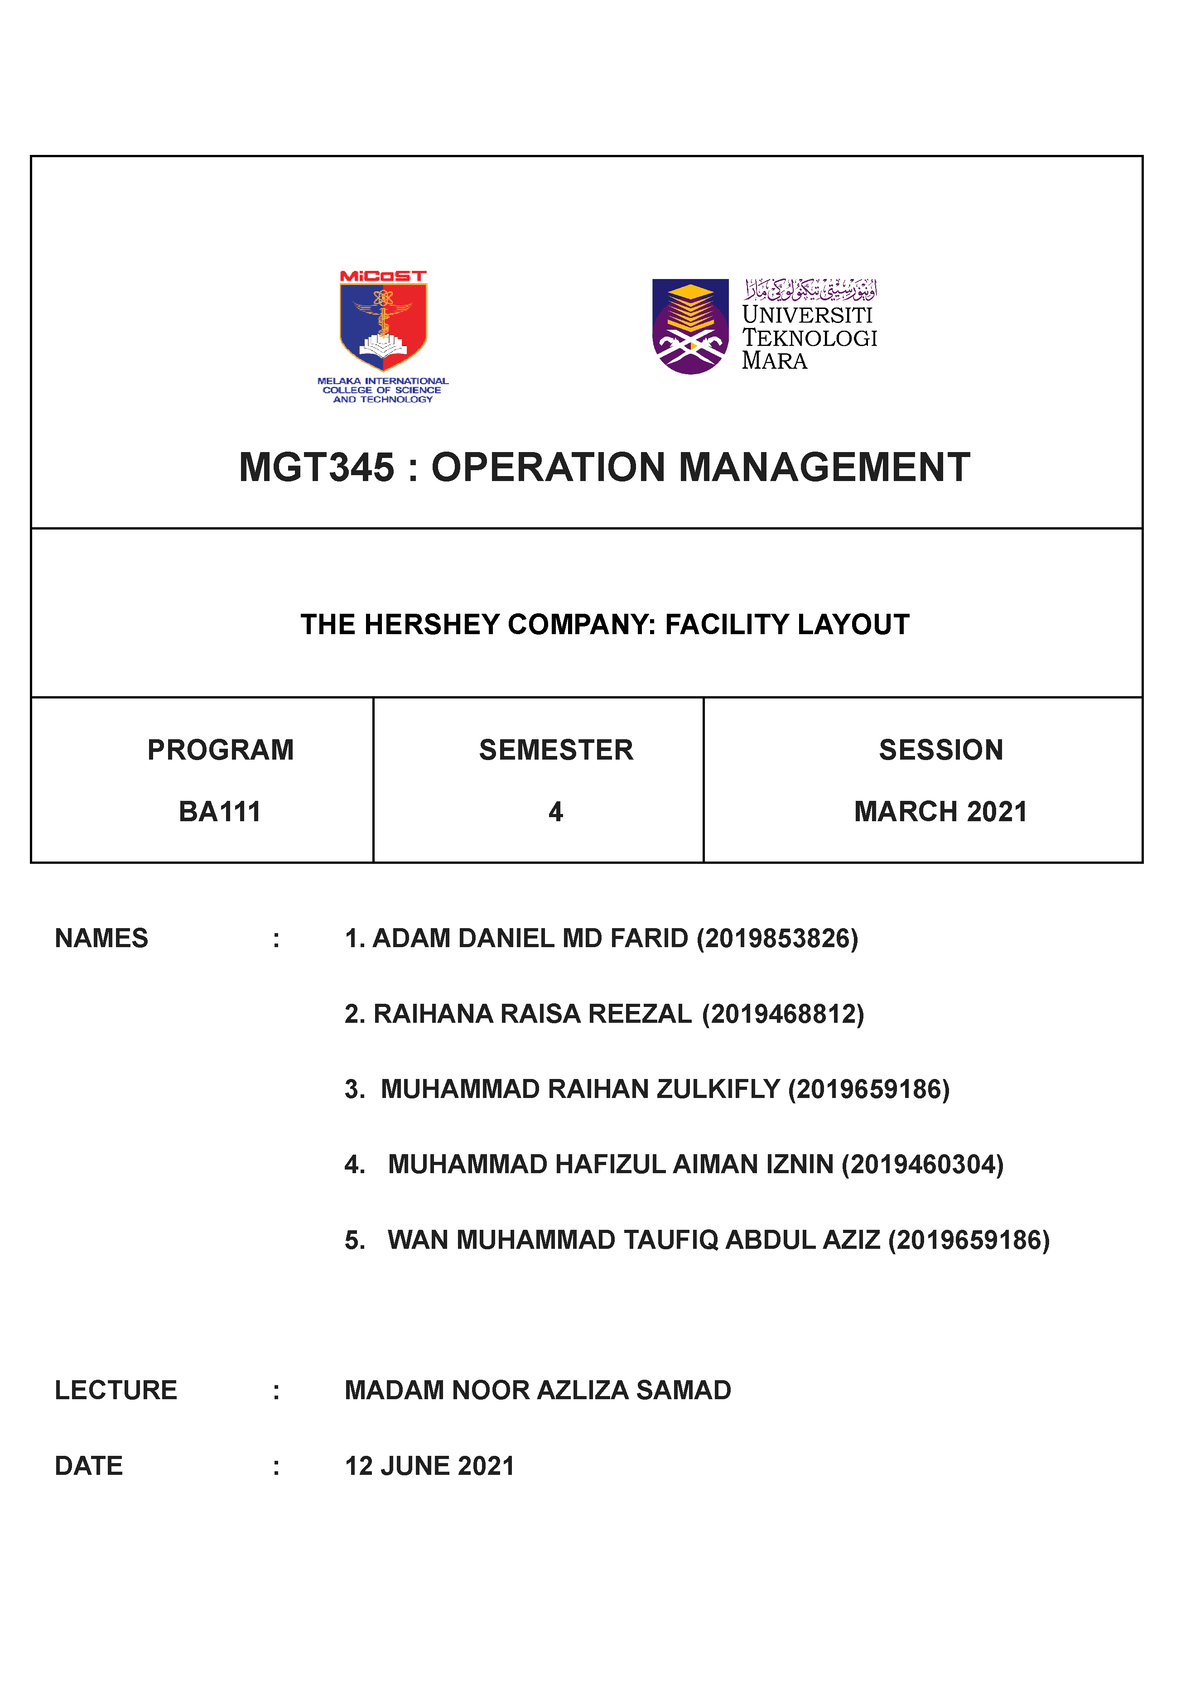 group assignment mgt345